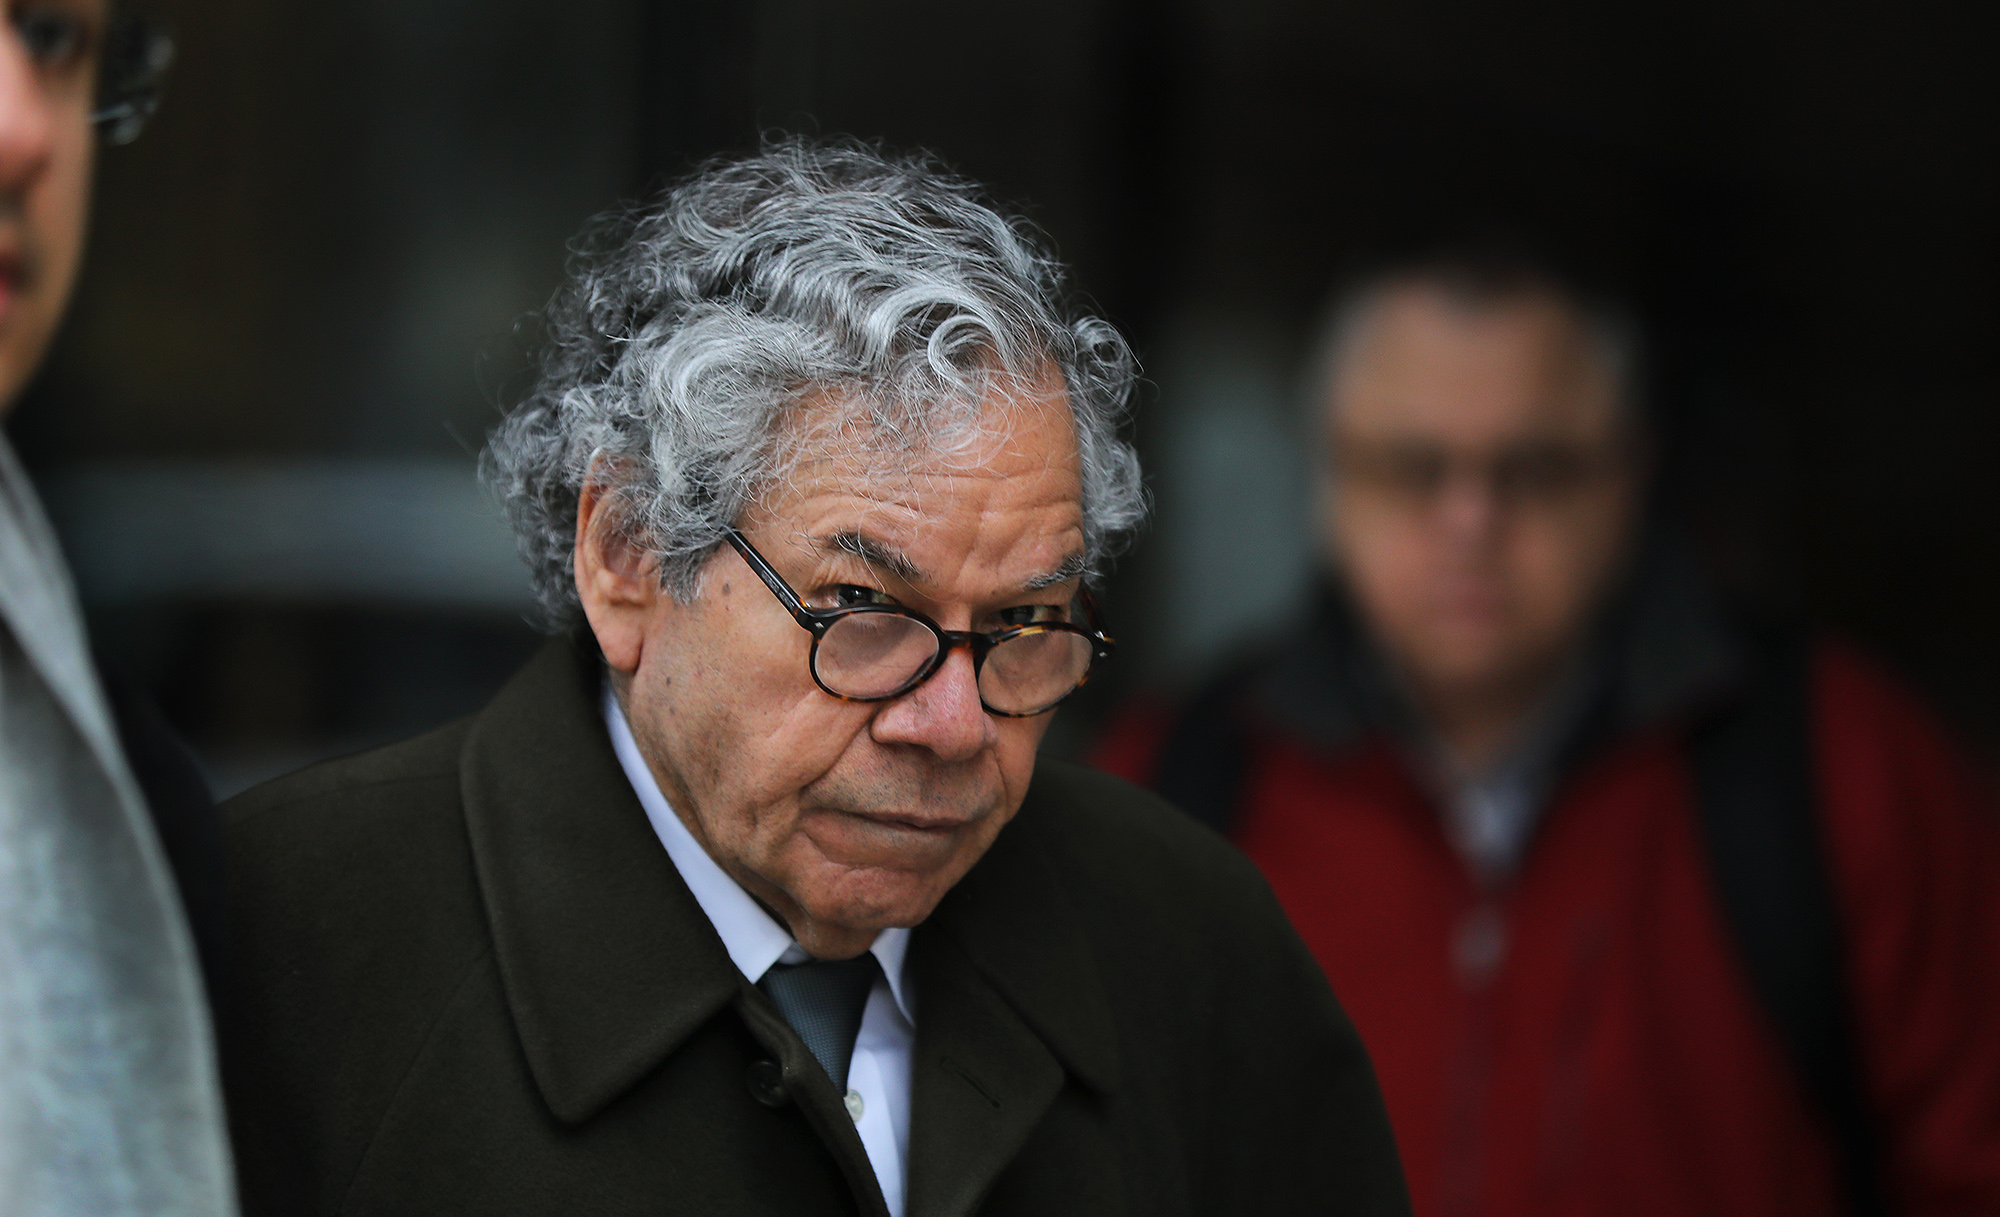 John Kapoor leaves federal court in Boston on March 13, 2019.